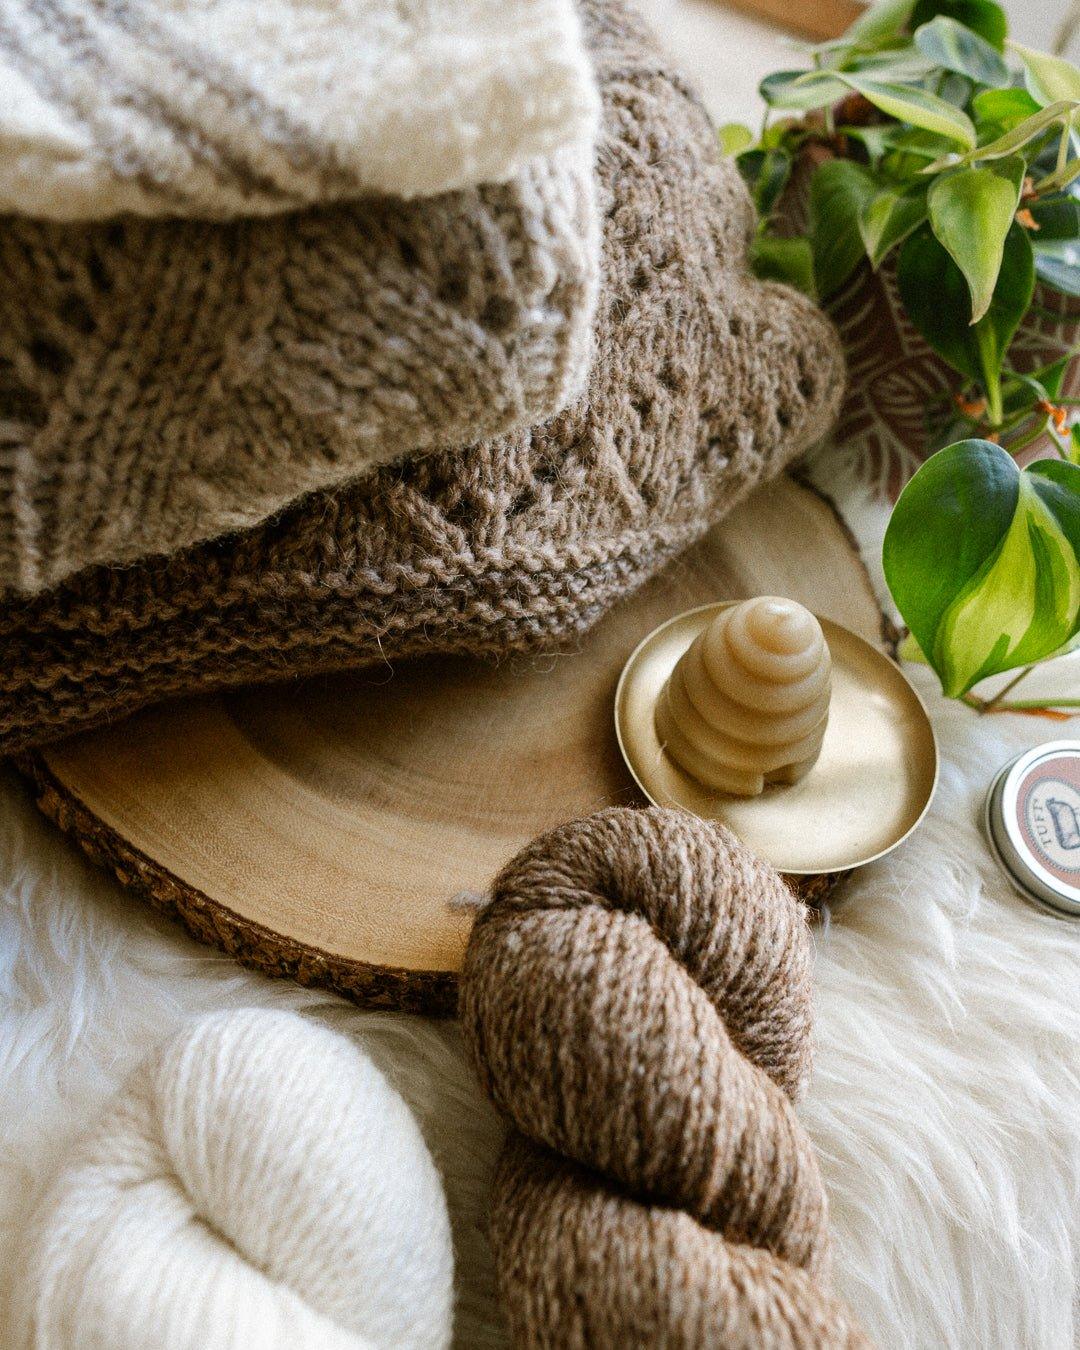 Fiber matters when knitting for cold weather. - Aimee Sher Makes